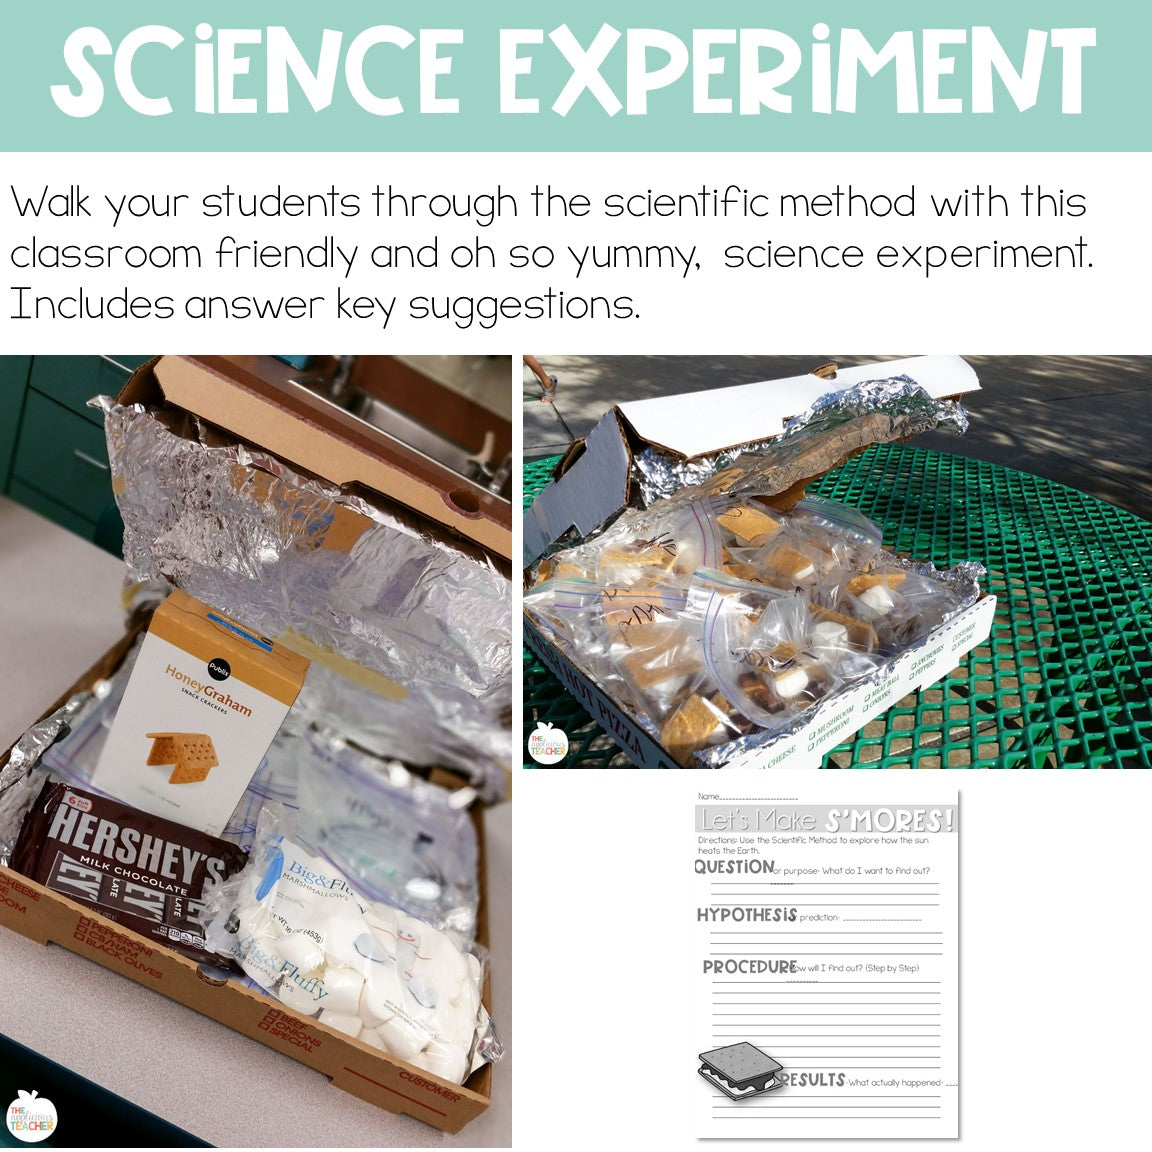 Let's Make Smores: Smores Science Experiment and ELA Mini Pack